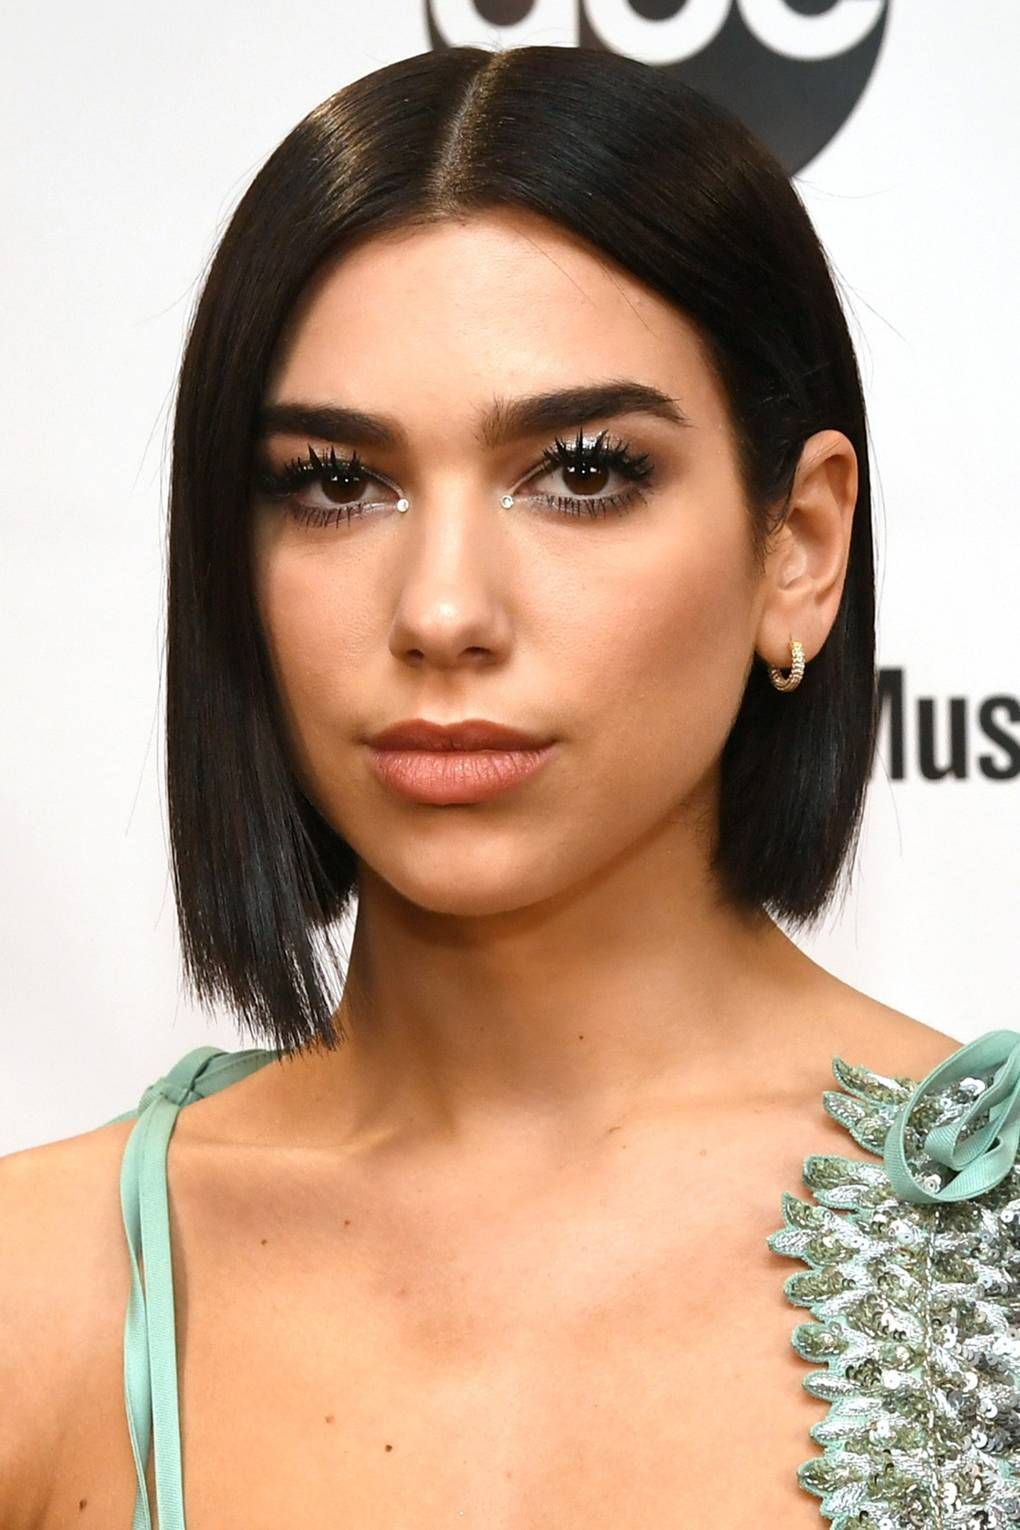 Updos, down-dos and everything in between: The best hairstyles to try at home RN -   14 dua lipa hair Short ideas